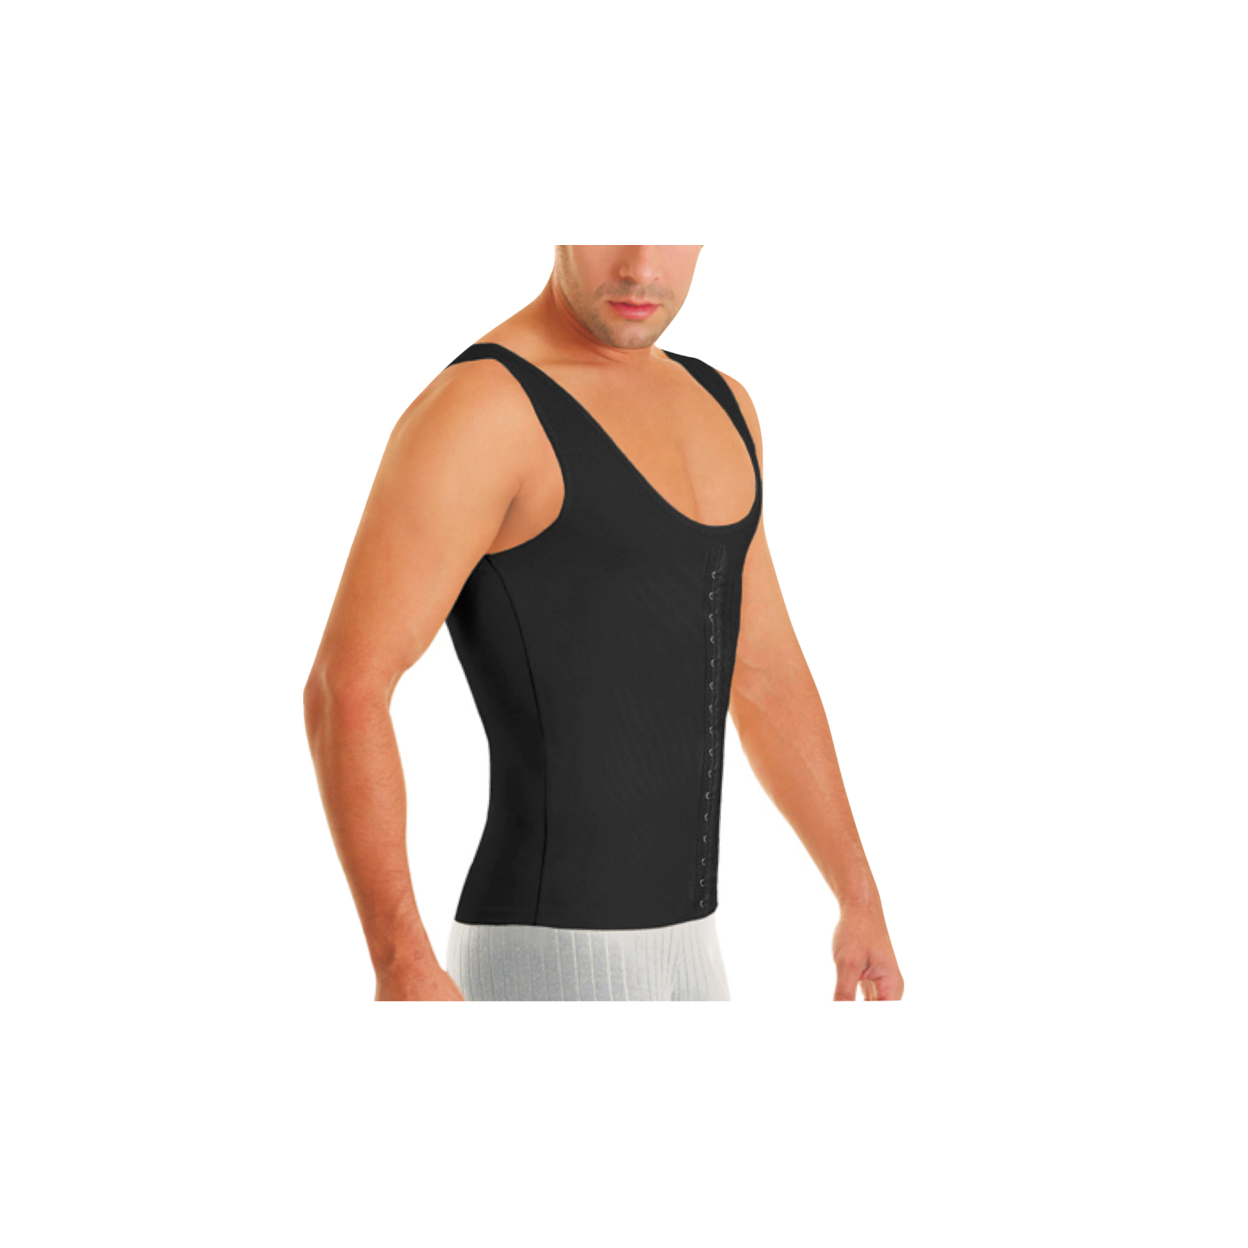 Men Waistcoat High-Compression Body Shaper In Regular And Plus Sizes - Black, XL